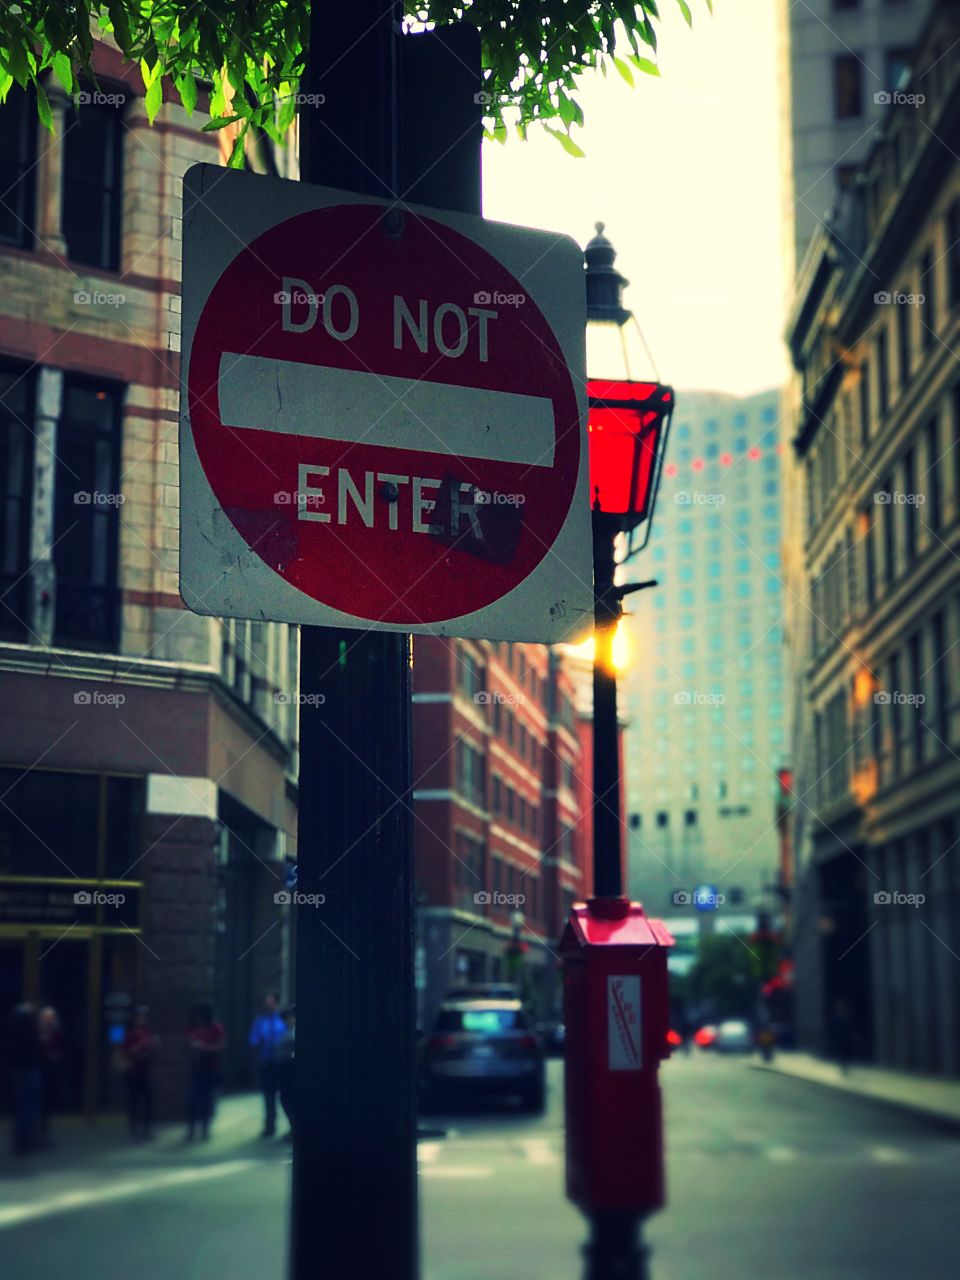 A street sign found in Boston’s theater district.